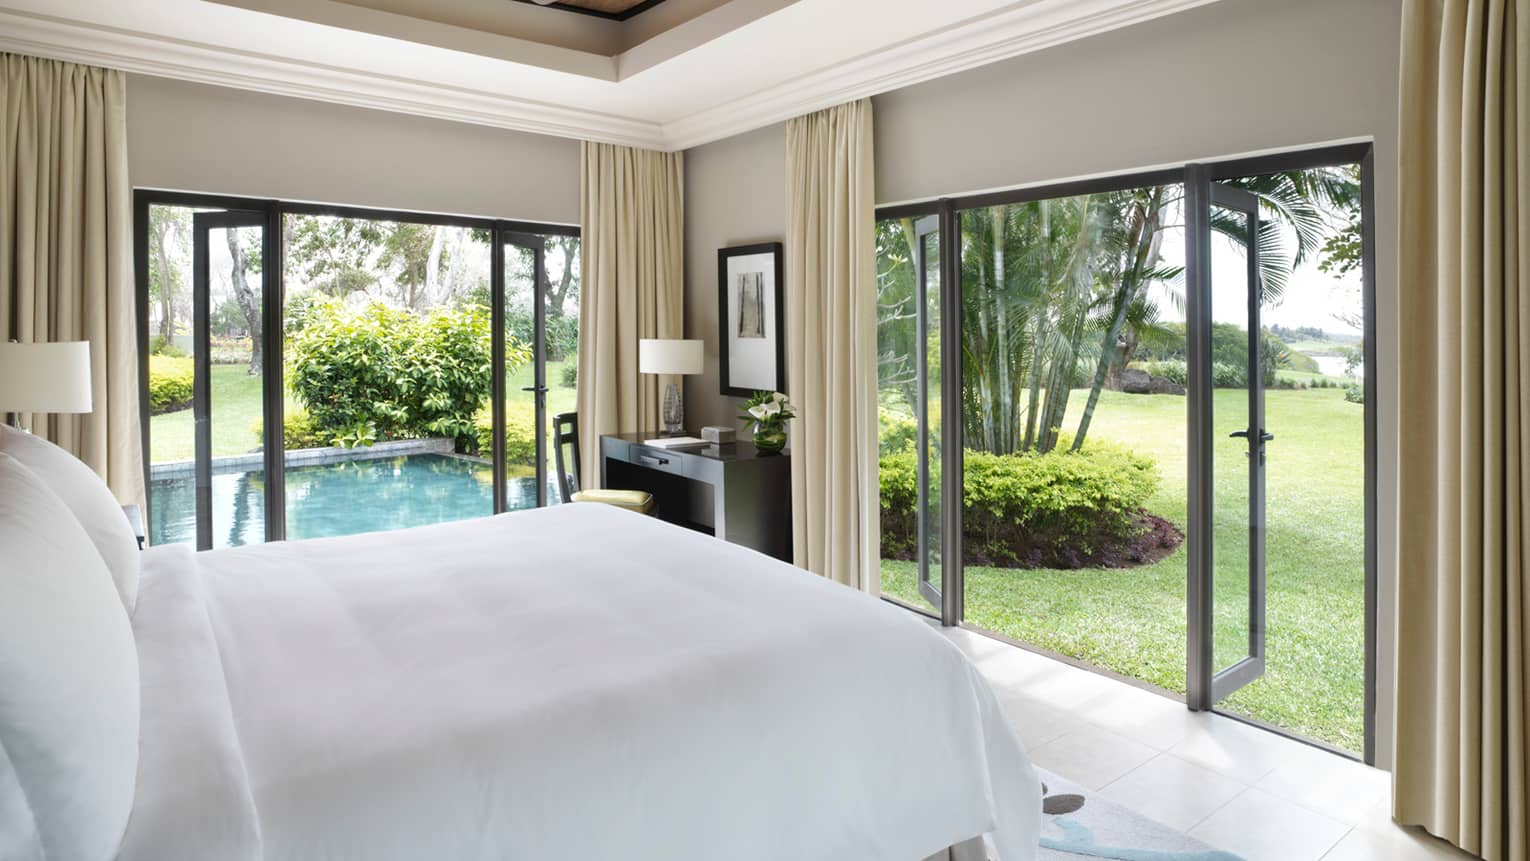 Deluxe Residence Villa side of bed with white linens, open corner patio doors, plunge pool